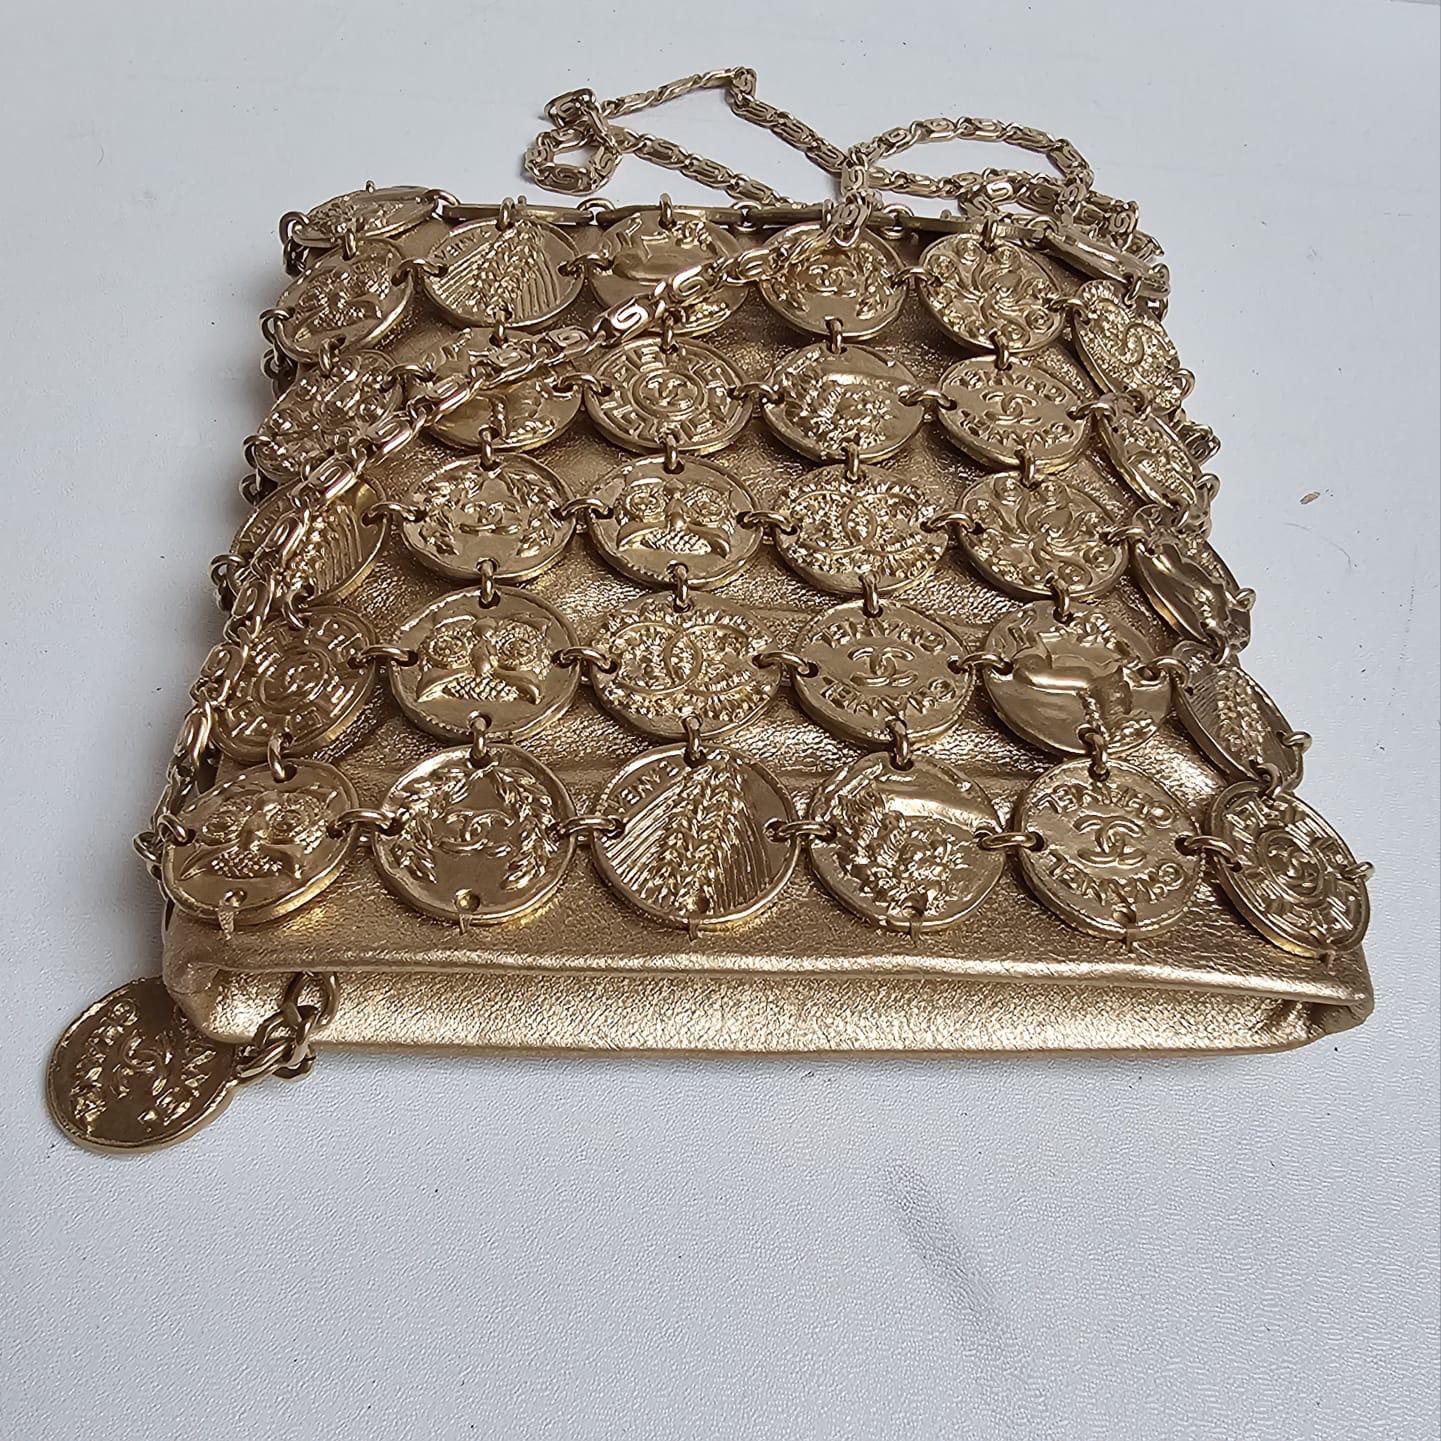 Rare Chanel Cruise 2018 Metier D’Art Gold Medallion Chain Bag For Sale 10